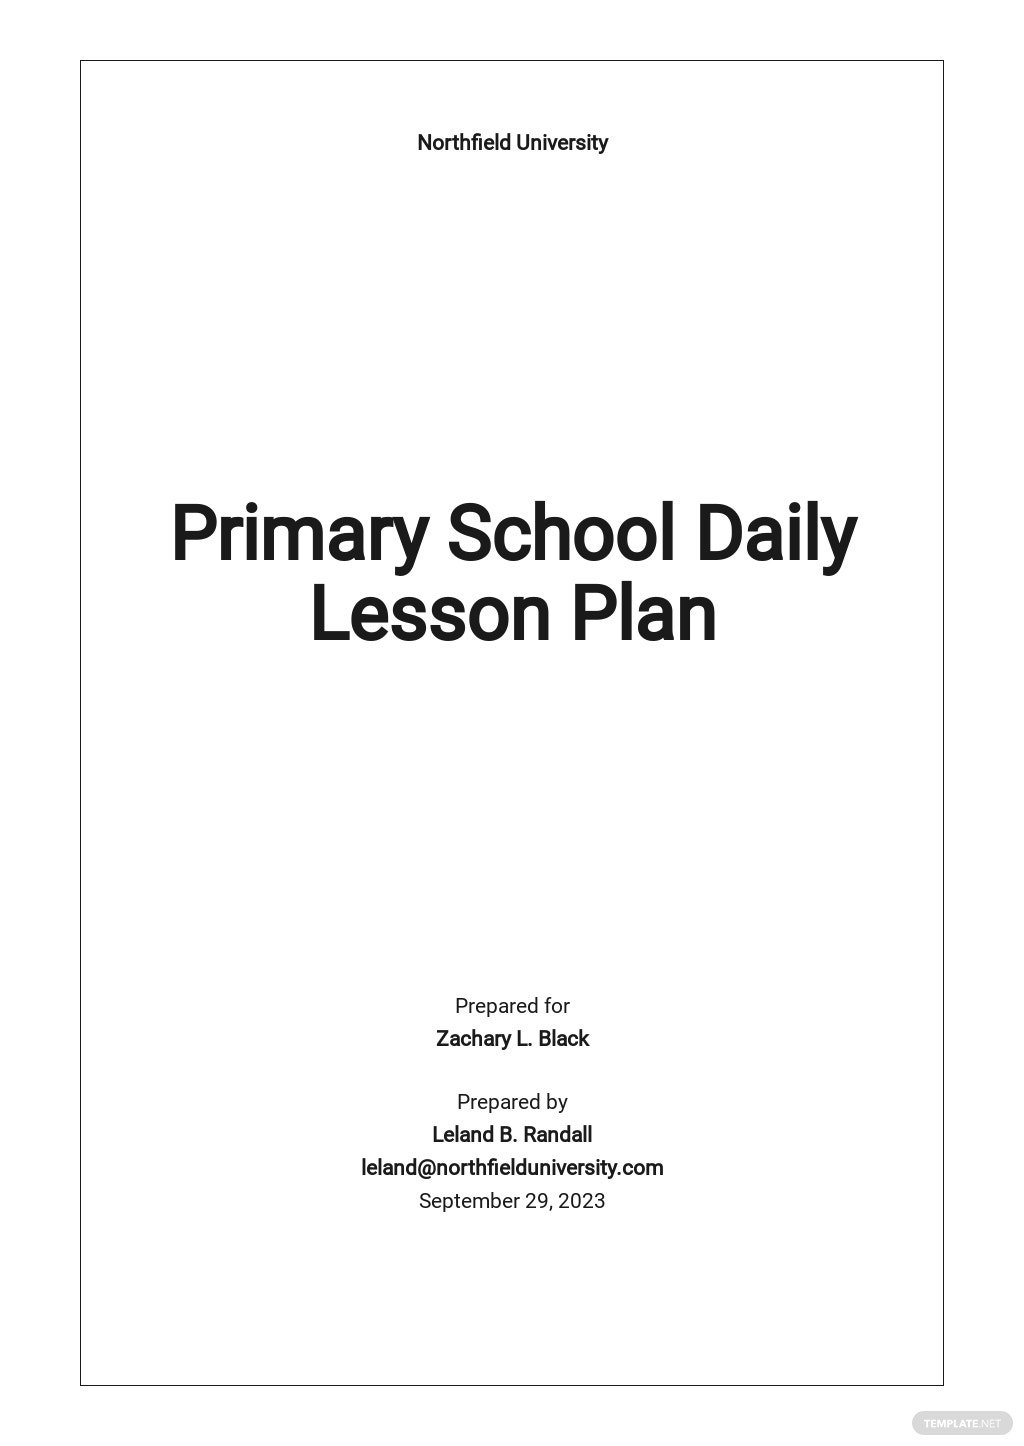 primary school daily lesson plan template